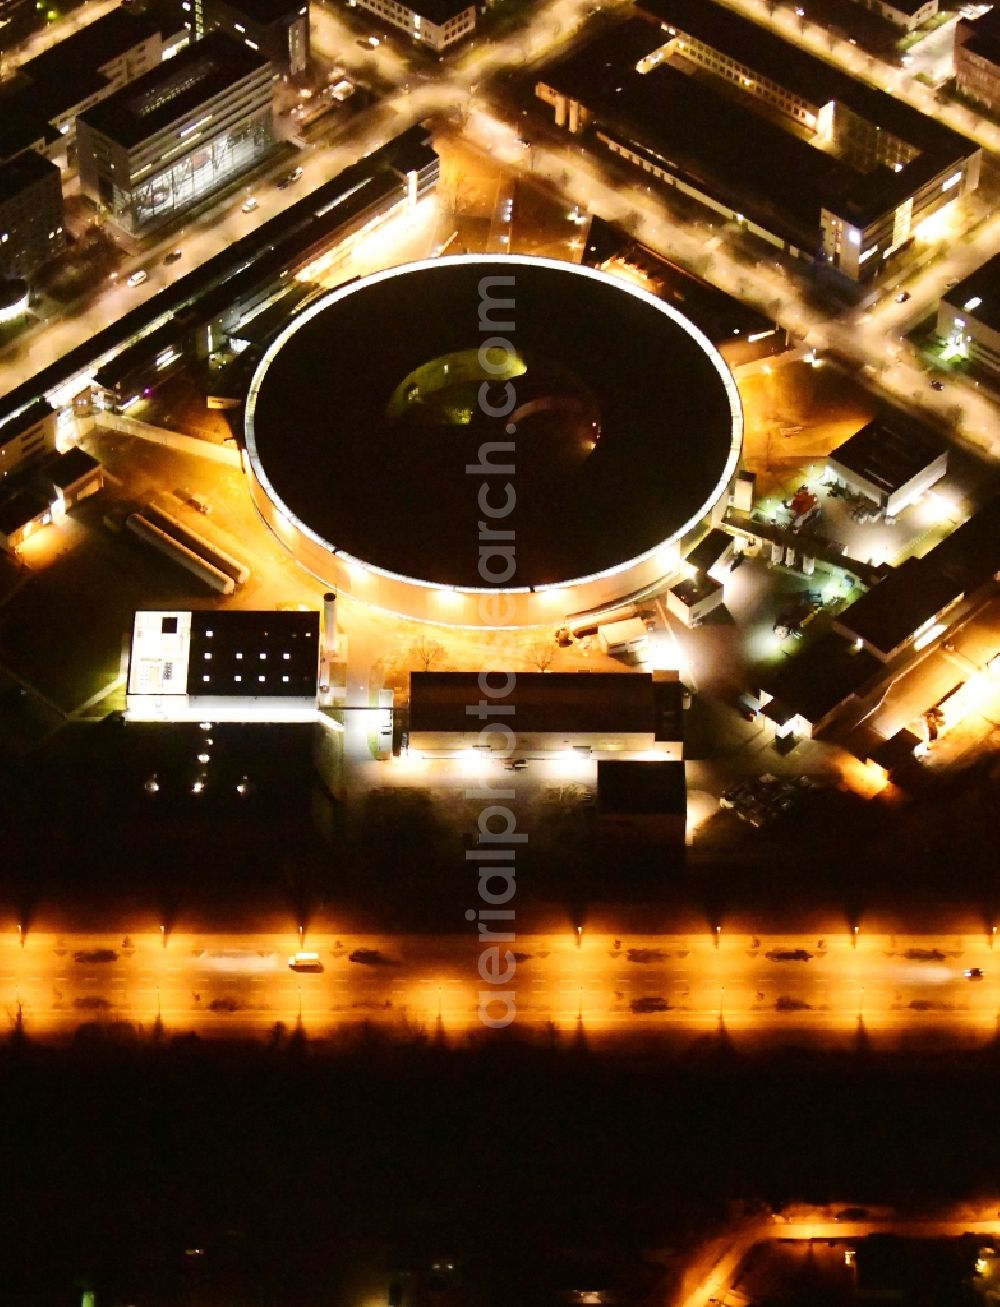 Berlin at night from above - Night lighting research building and office complex Elektronen- Speicherring BESSY - Synchrotronstrahlungsquelle in the district Adlershof in Berlin, Germany